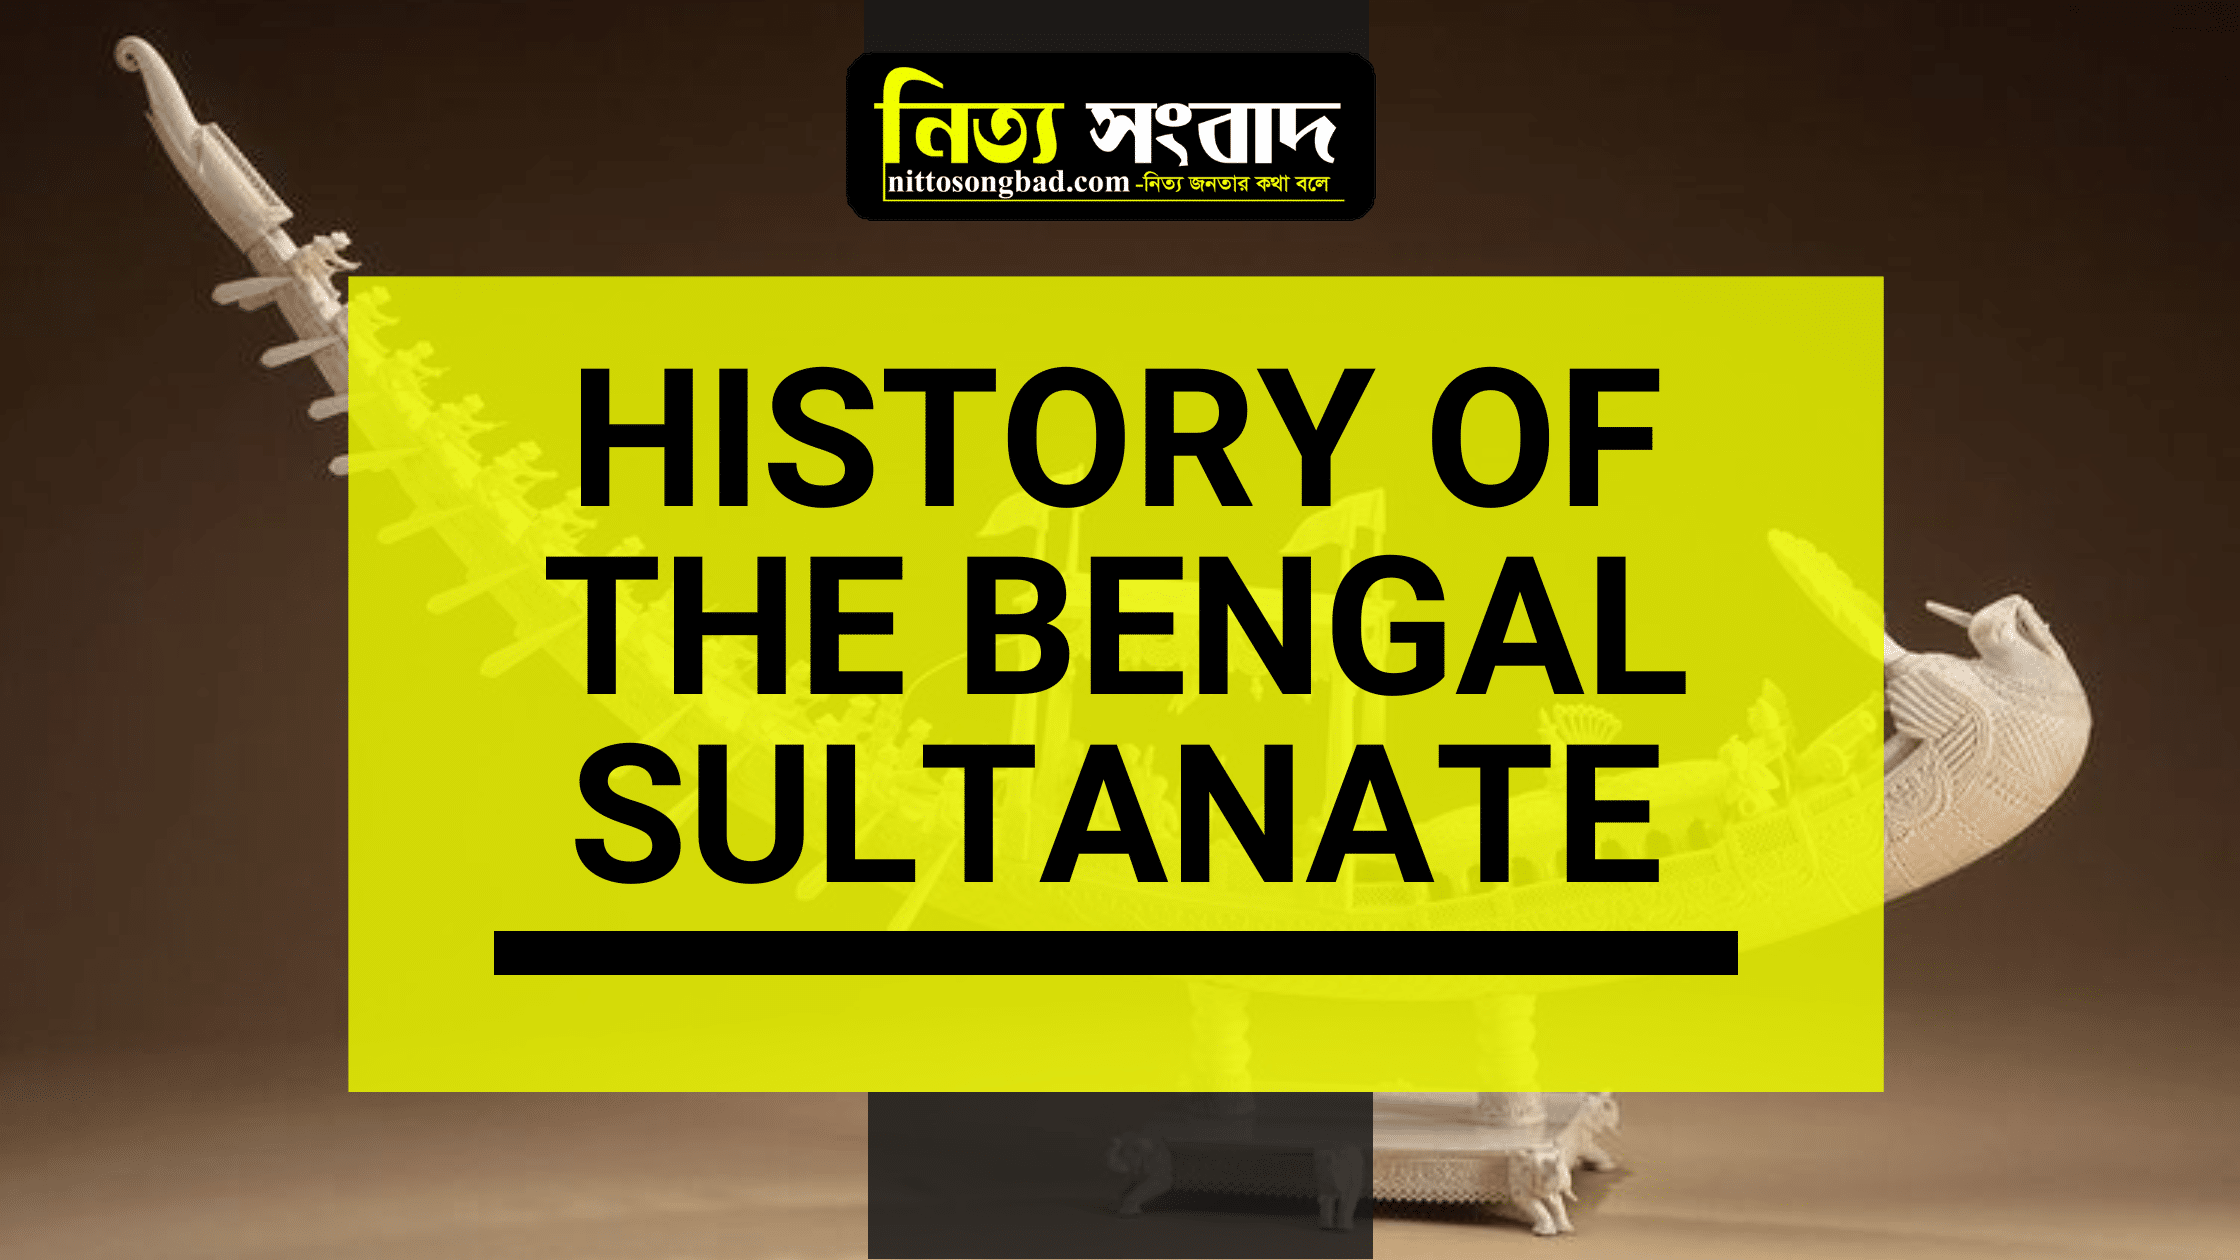 History of the Bengal Sultanate